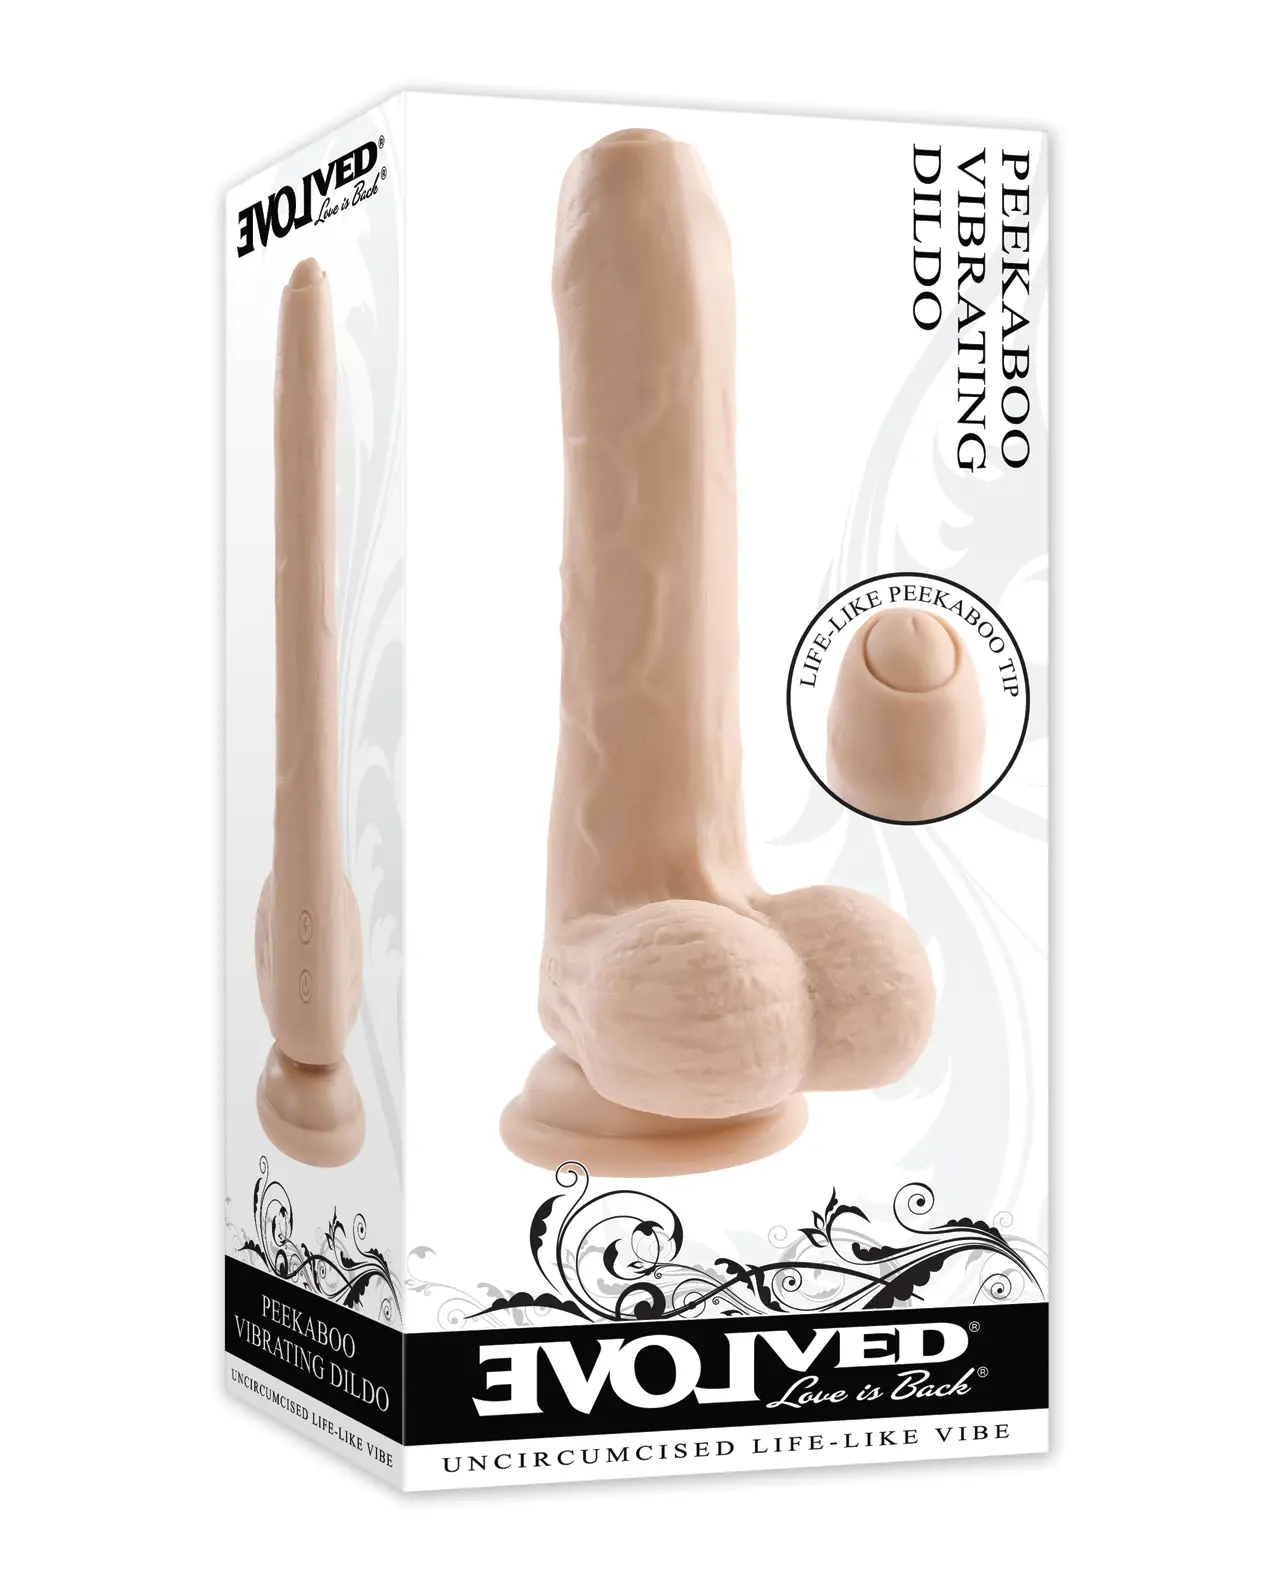 Uncircumcised vibrating dildo in Ivory on a white box